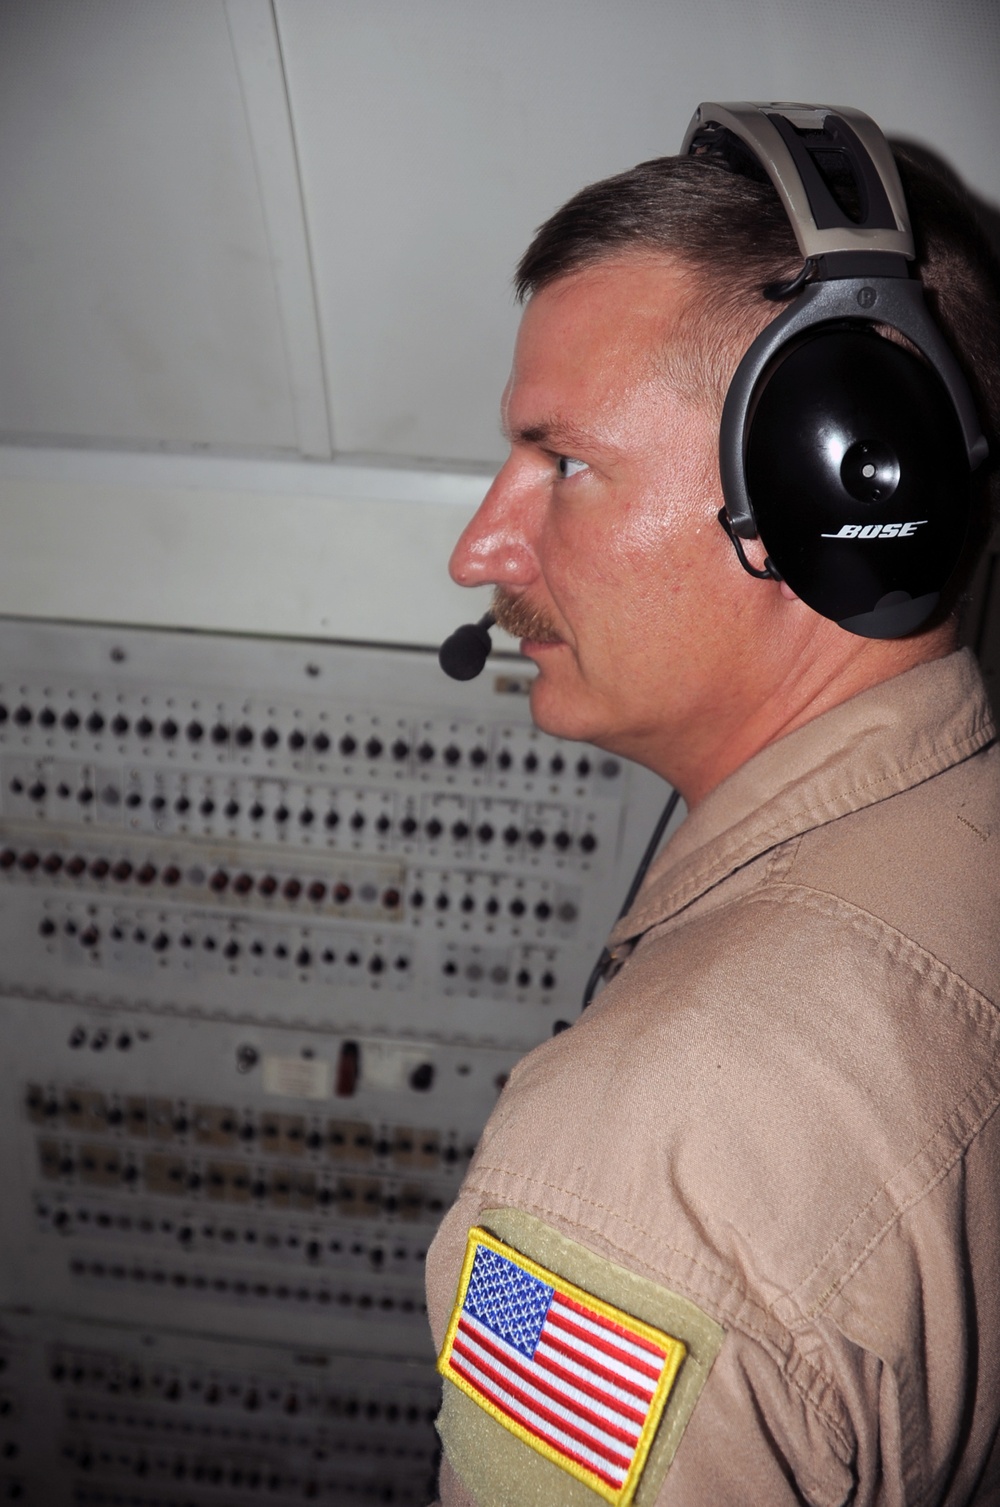 Tinker Master Sergeant, Winston Native, Supervises Radar Ops on AWACS Combat Air Missions in Southwest Asia